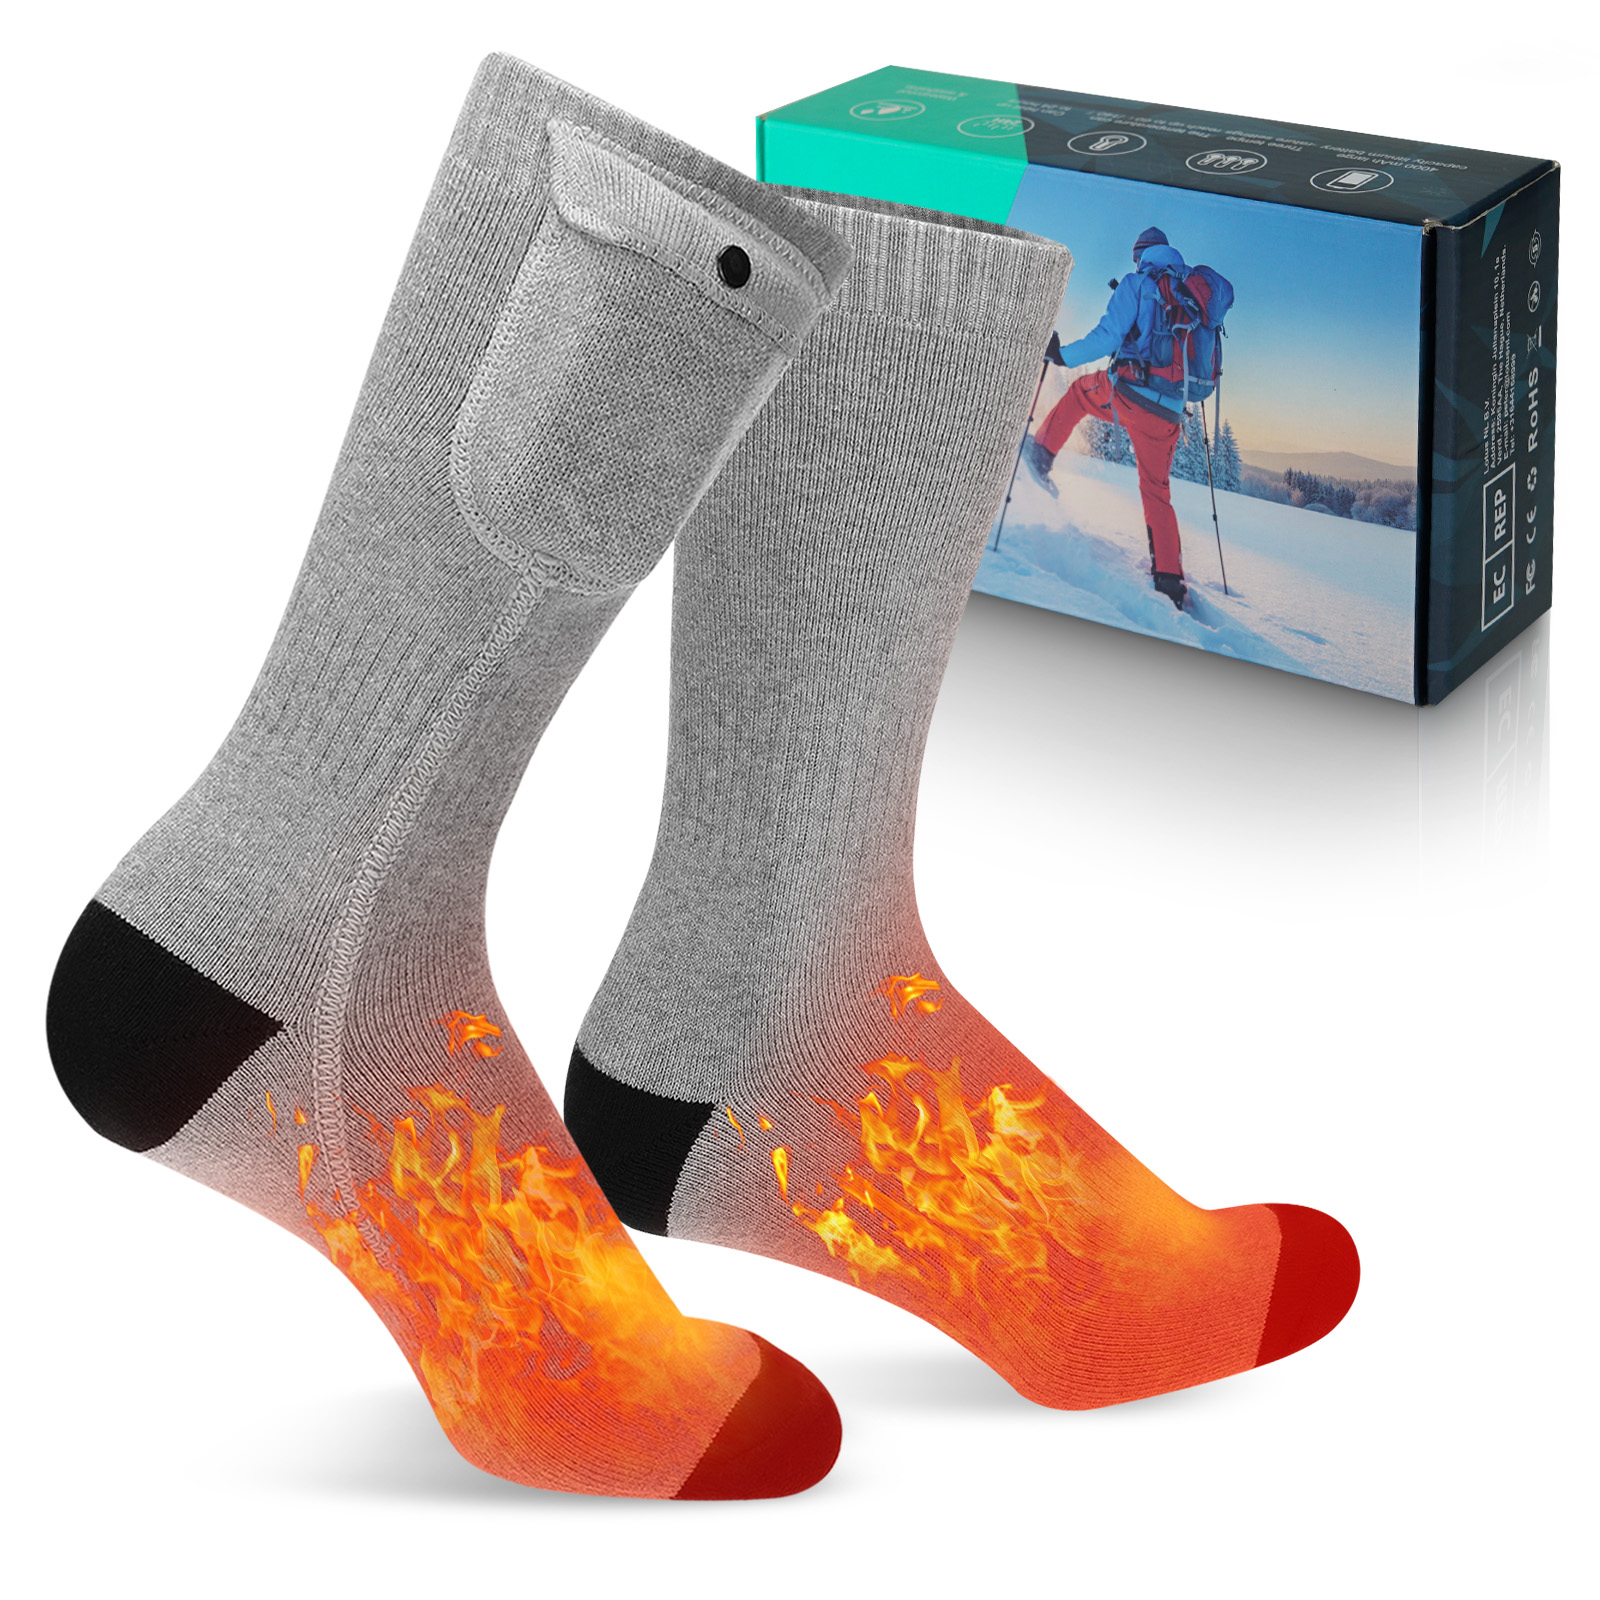 Heated Socks 3 Heating Settings Rechargeable Battery Electric Cotton Socks USA 